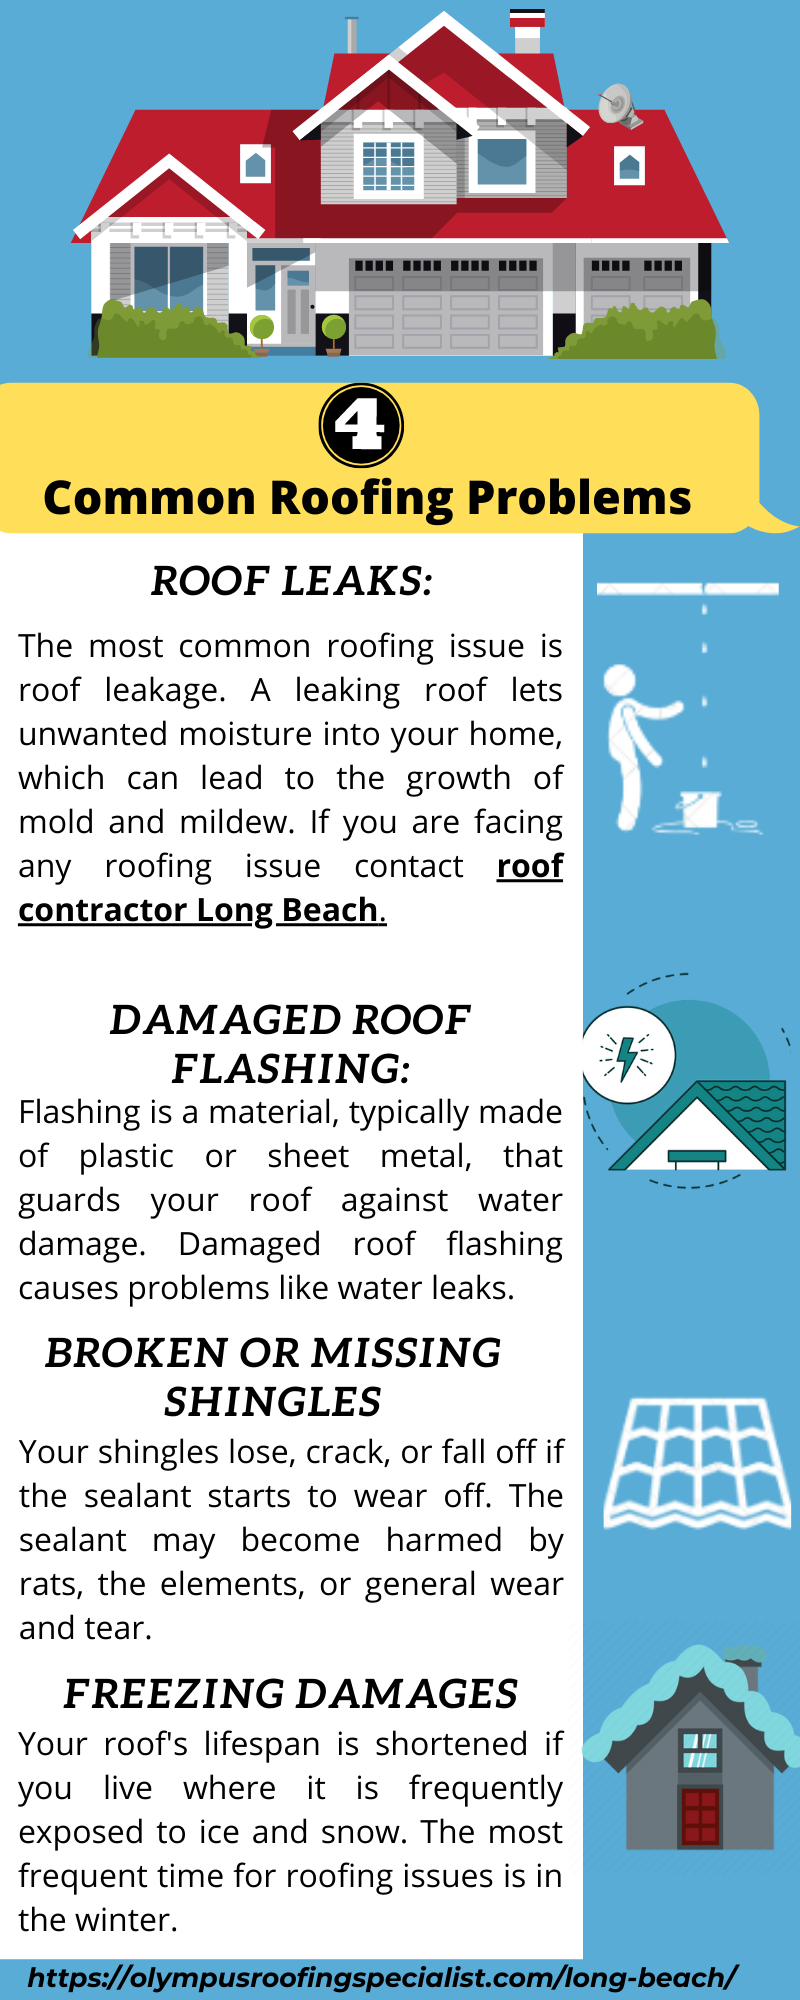 4 Common Roofing Problems